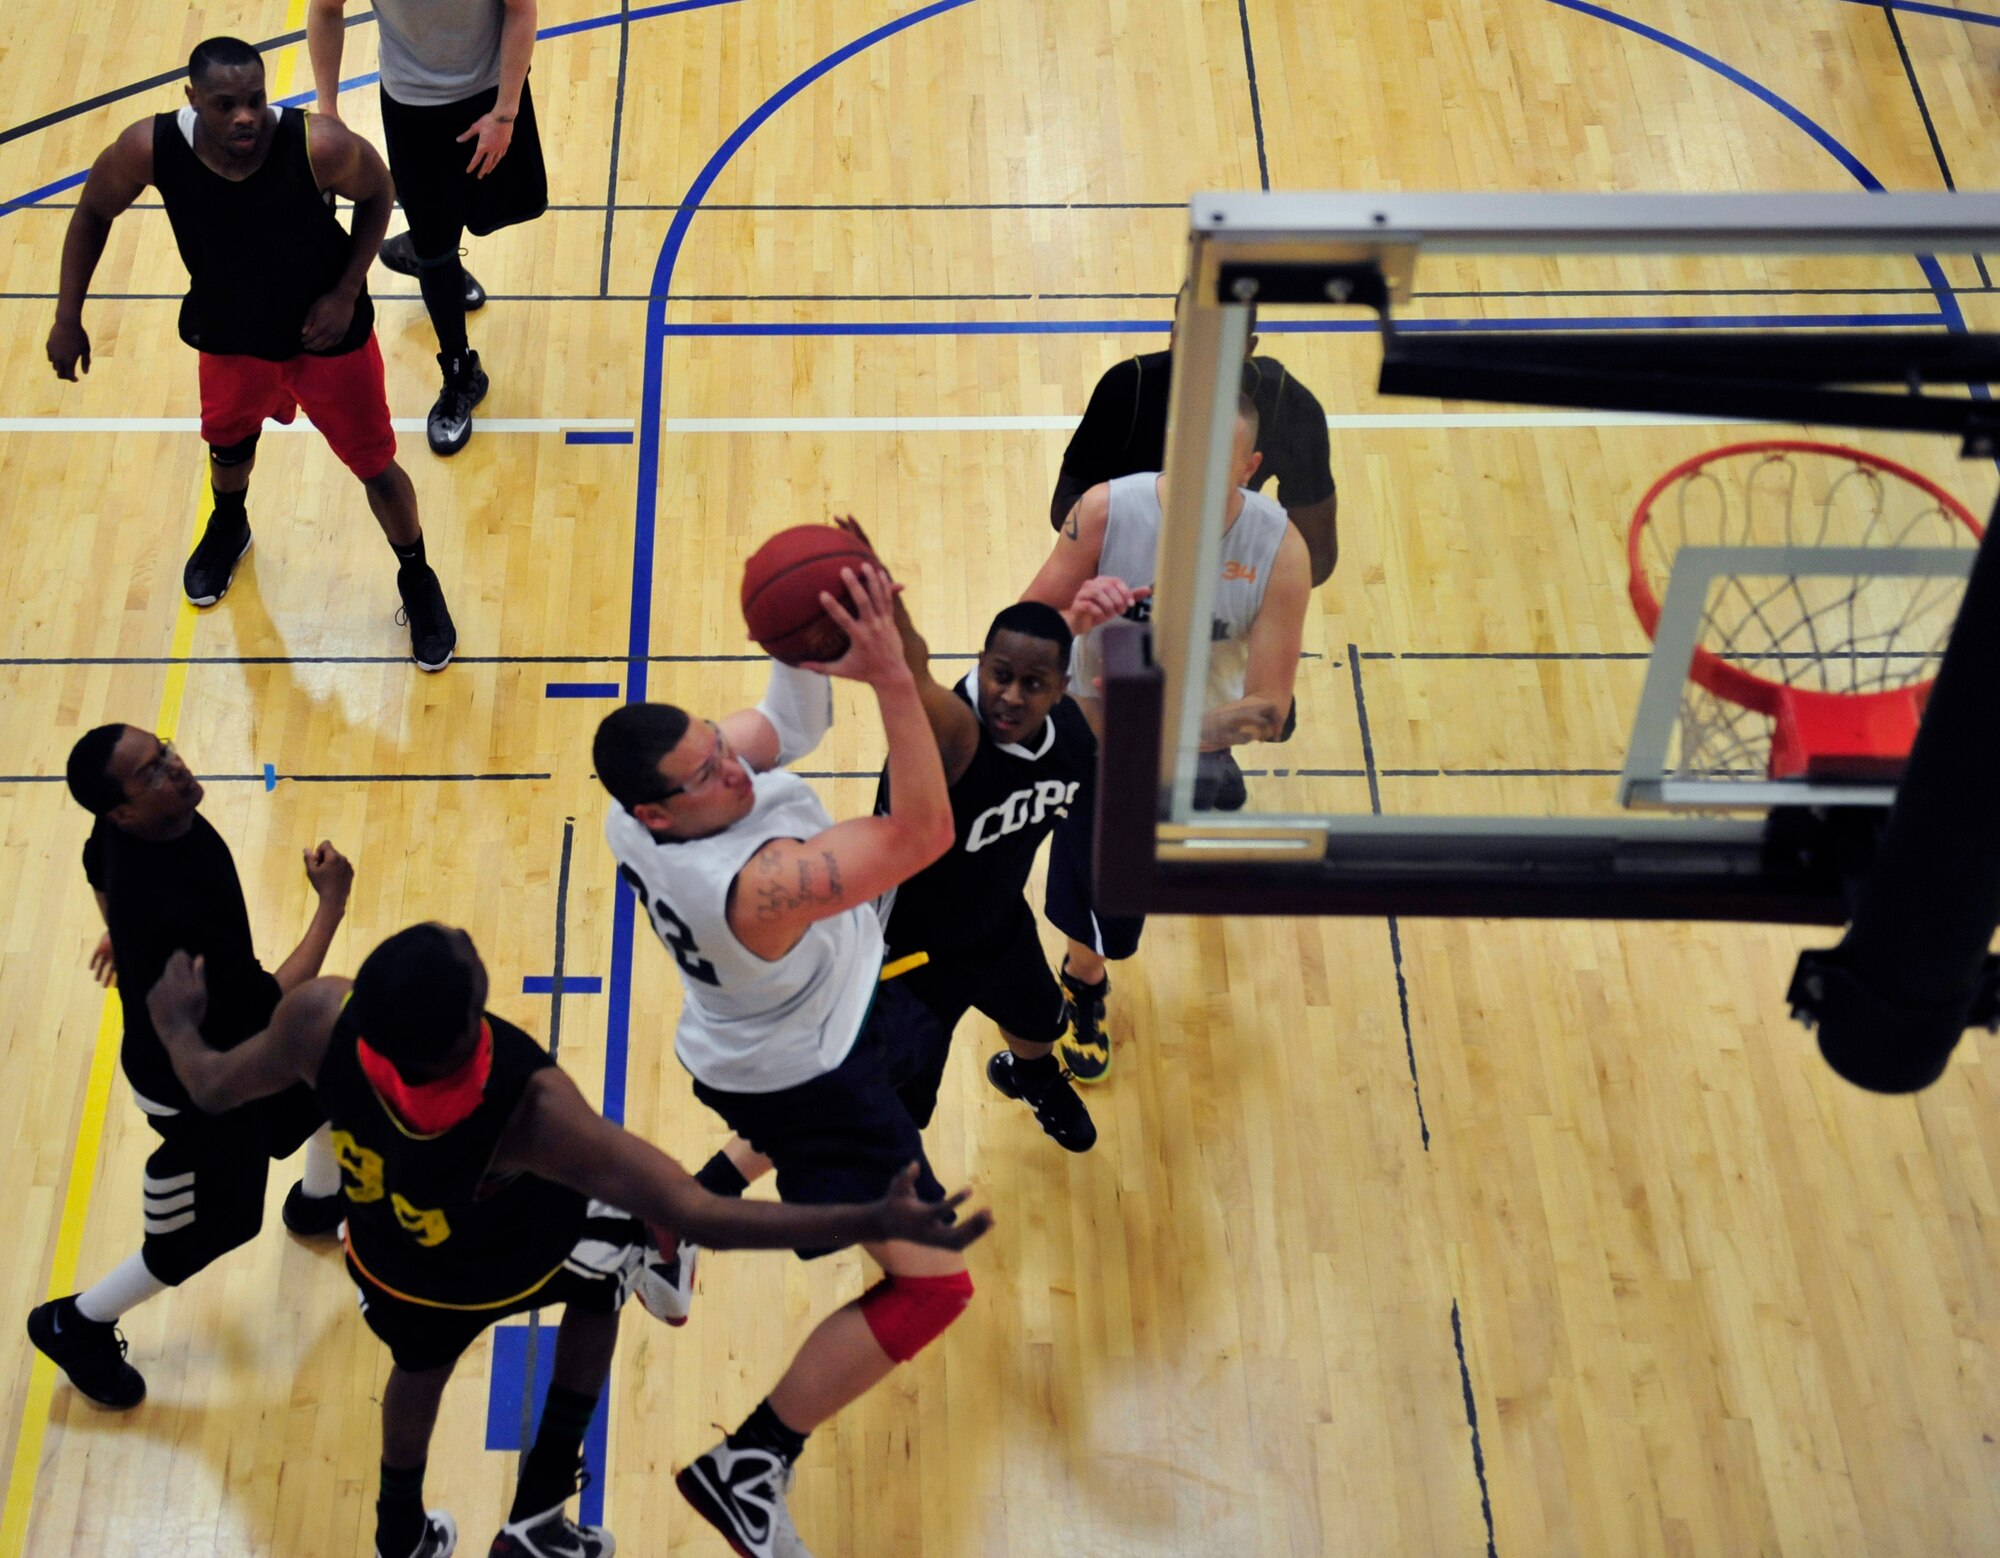 A member from the 566th Intelligence Squadron leaps for a layup against the 460th Security Forces Squadron intramural basketball team March 13, 2013, on Buckley Air Force Base, Colo. The 566th IS team suffered defeat in the base championship game. (U.S. Air Force photo by Airman 1st Class Darryl Bolden Jr. /Released)